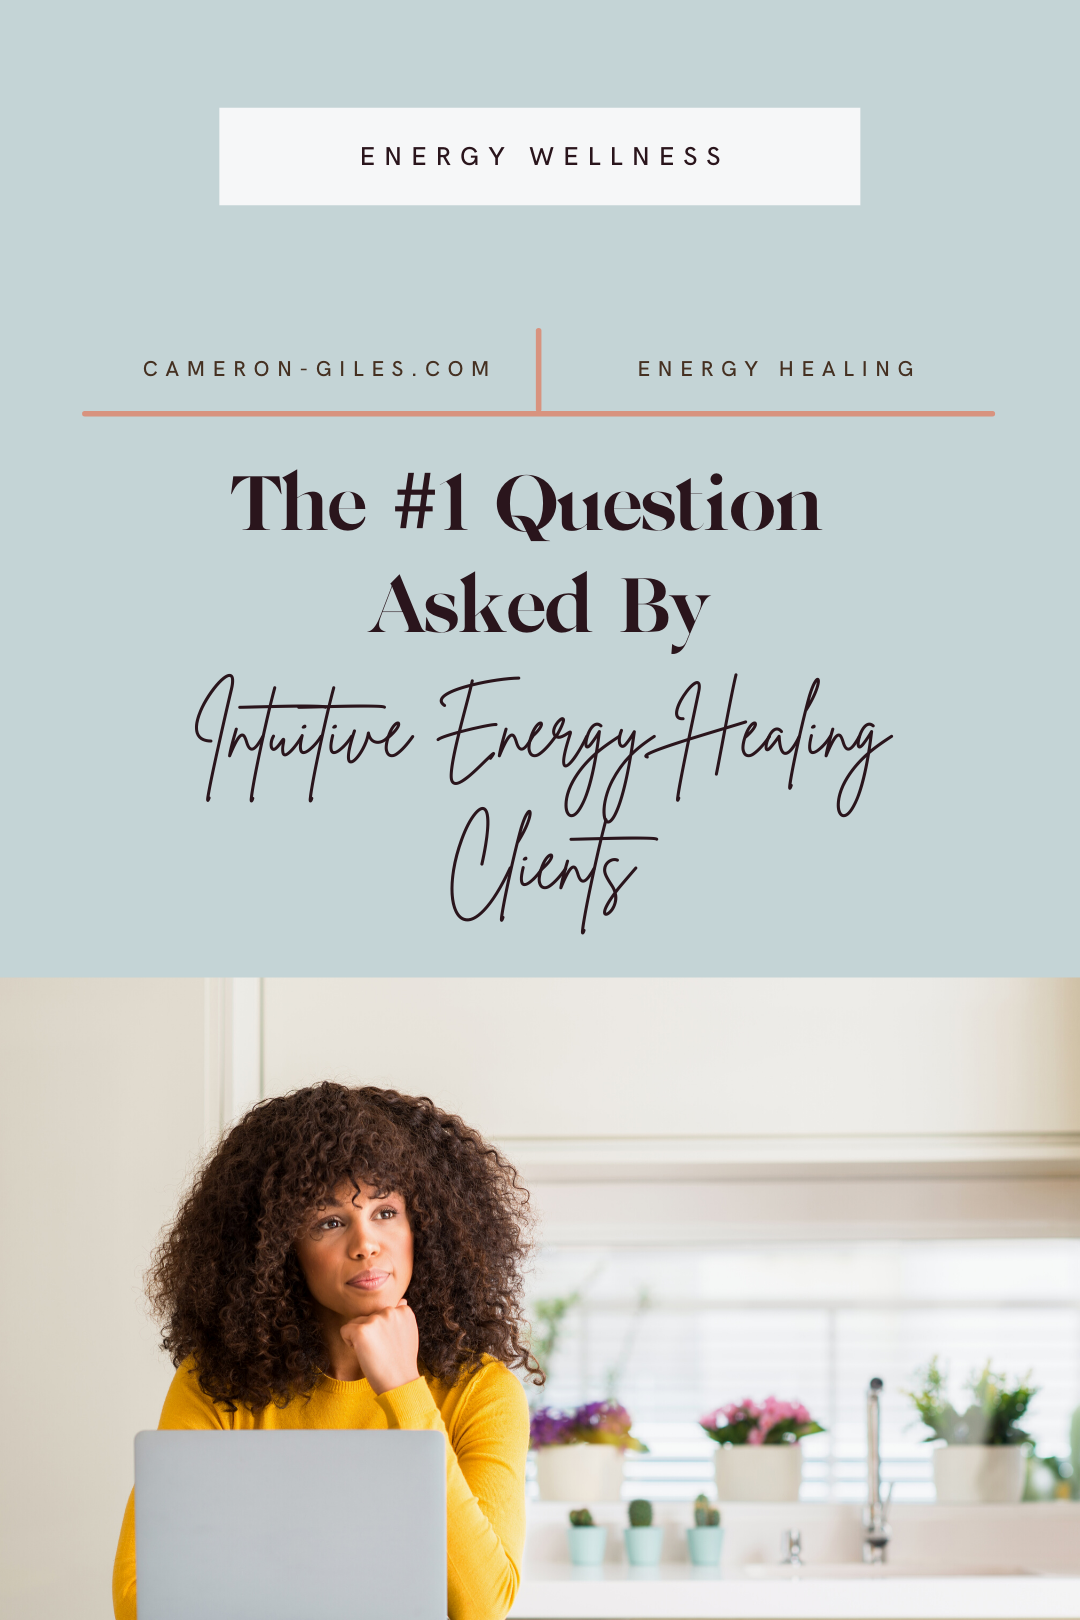 The number one question asked by intuitive energy healing clients